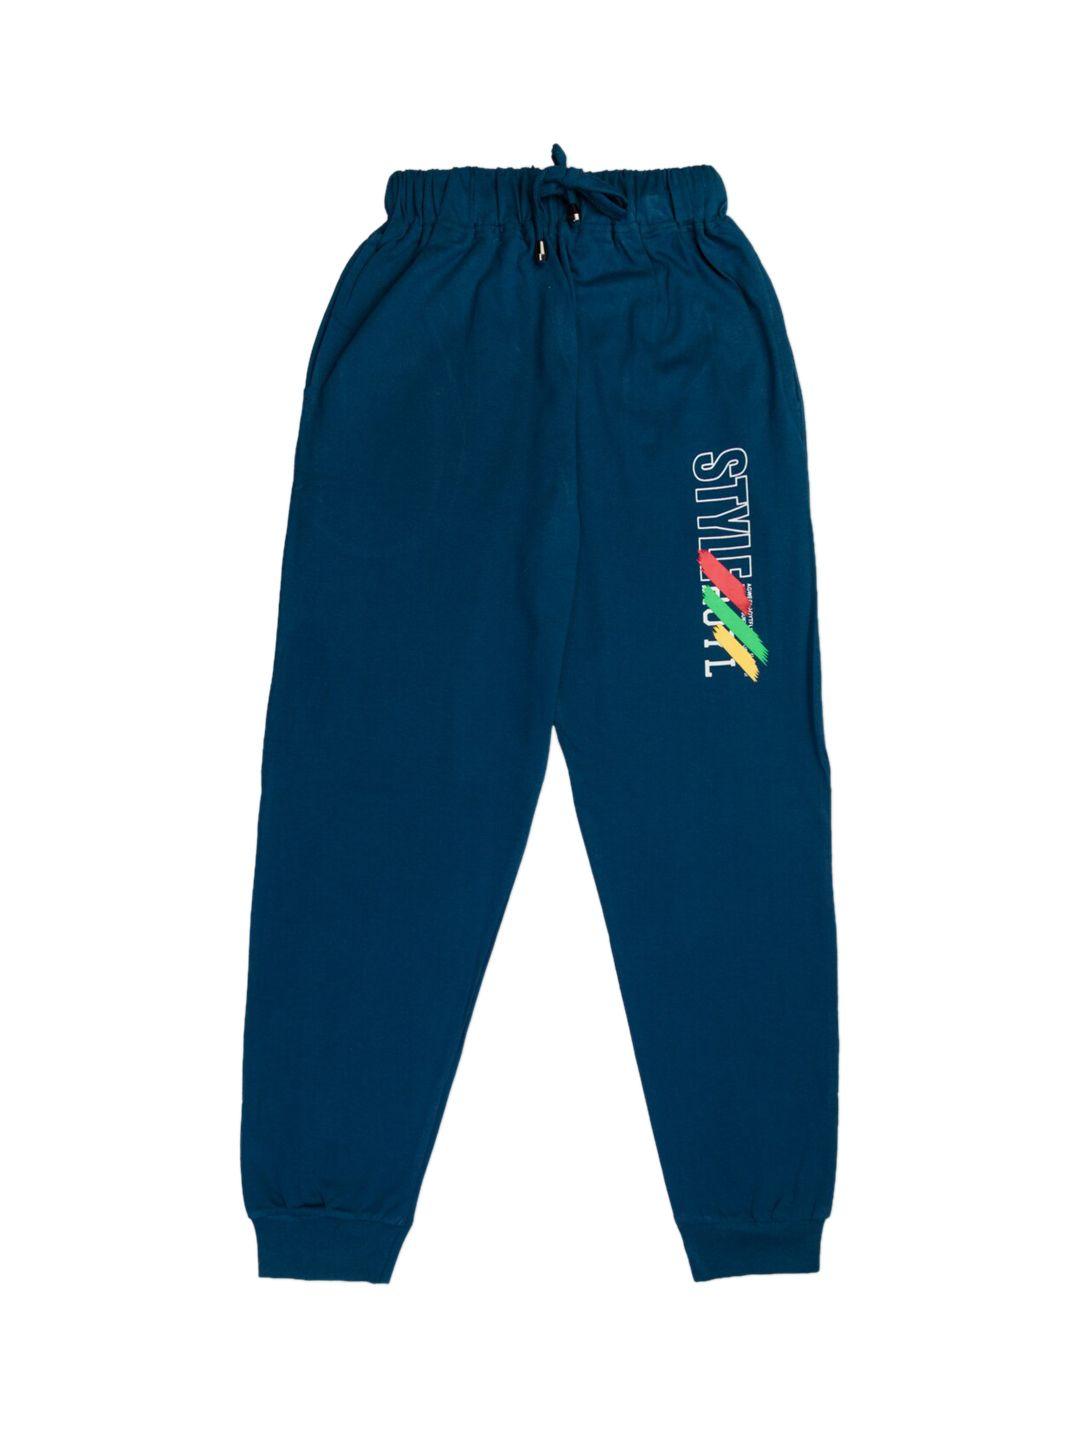 todd n teen boys blue solid cotton joggers